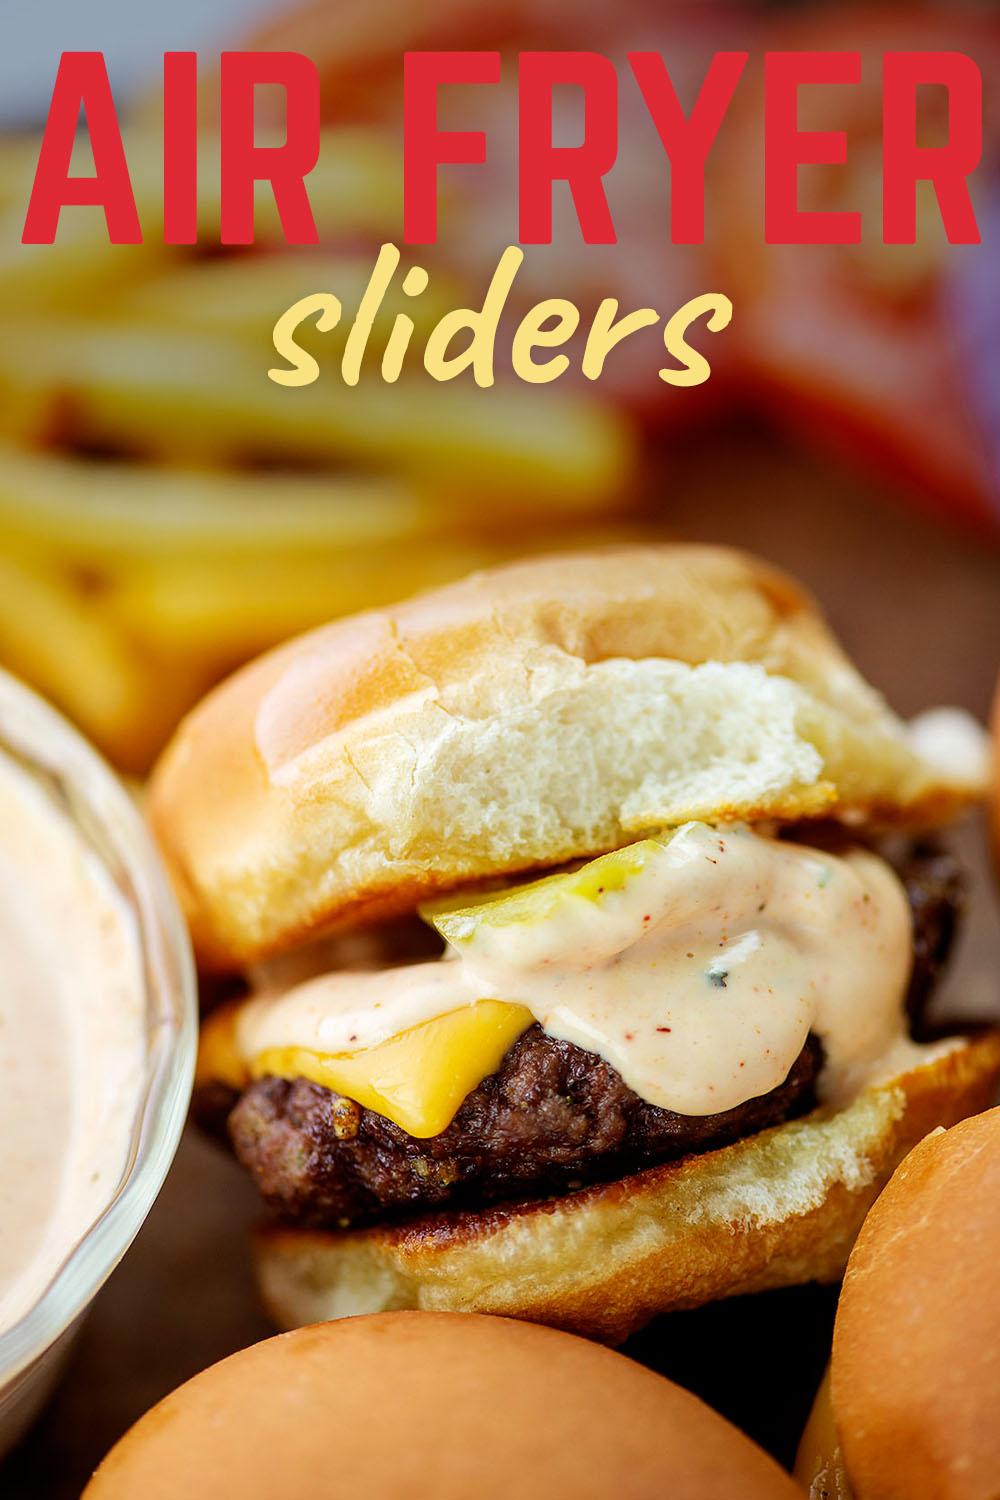 Air fryer sliders are a cinch to make and a wonderful savory treat! Serve as an appetizer or as a meal itself!